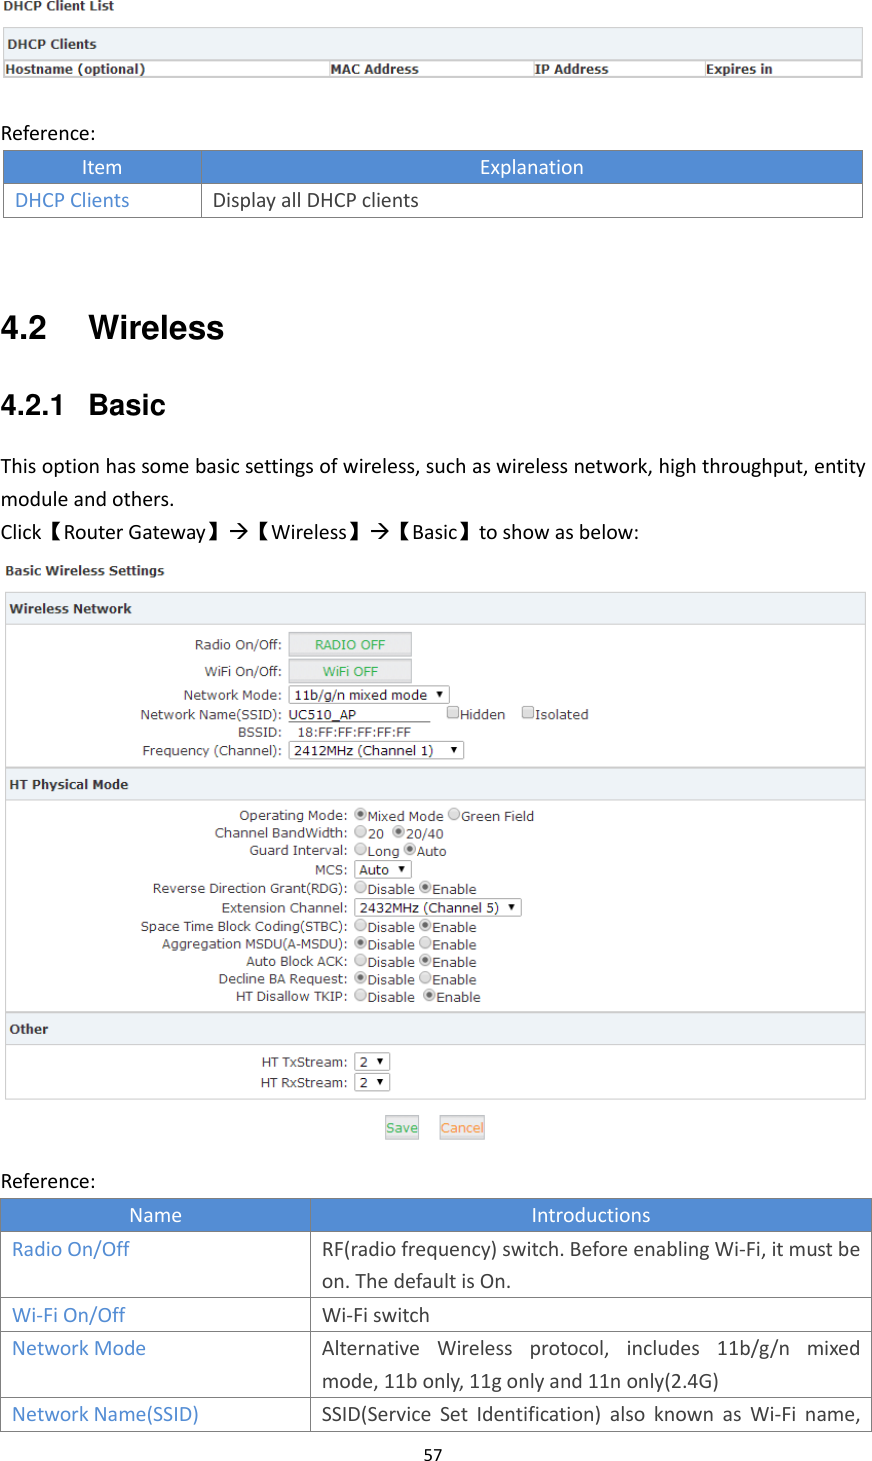  57   Reference: Item Explanation DHCP Clients Display all DHCP clients     4.2  Wireless 4.2.1  Basic This option has some basic settings of wireless, such as wireless network, high throughput, entity module and others. Click【Router Gateway】【Wireless】【Basic】to show as below:    Reference: Name Introductions Radio On/Off RF(radio frequency) switch. Before enabling Wi-Fi, it must be on. The default is On. Wi-Fi On/Off Wi-Fi switch   Network Mode Alternative  Wireless  protocol,  includes  11b/g/n  mixed mode, 11b only, 11g only and 11n only(2.4G) Network Name(SSID) SSID(Service  Set  Identification)  also  known  as  Wi-Fi  name, 